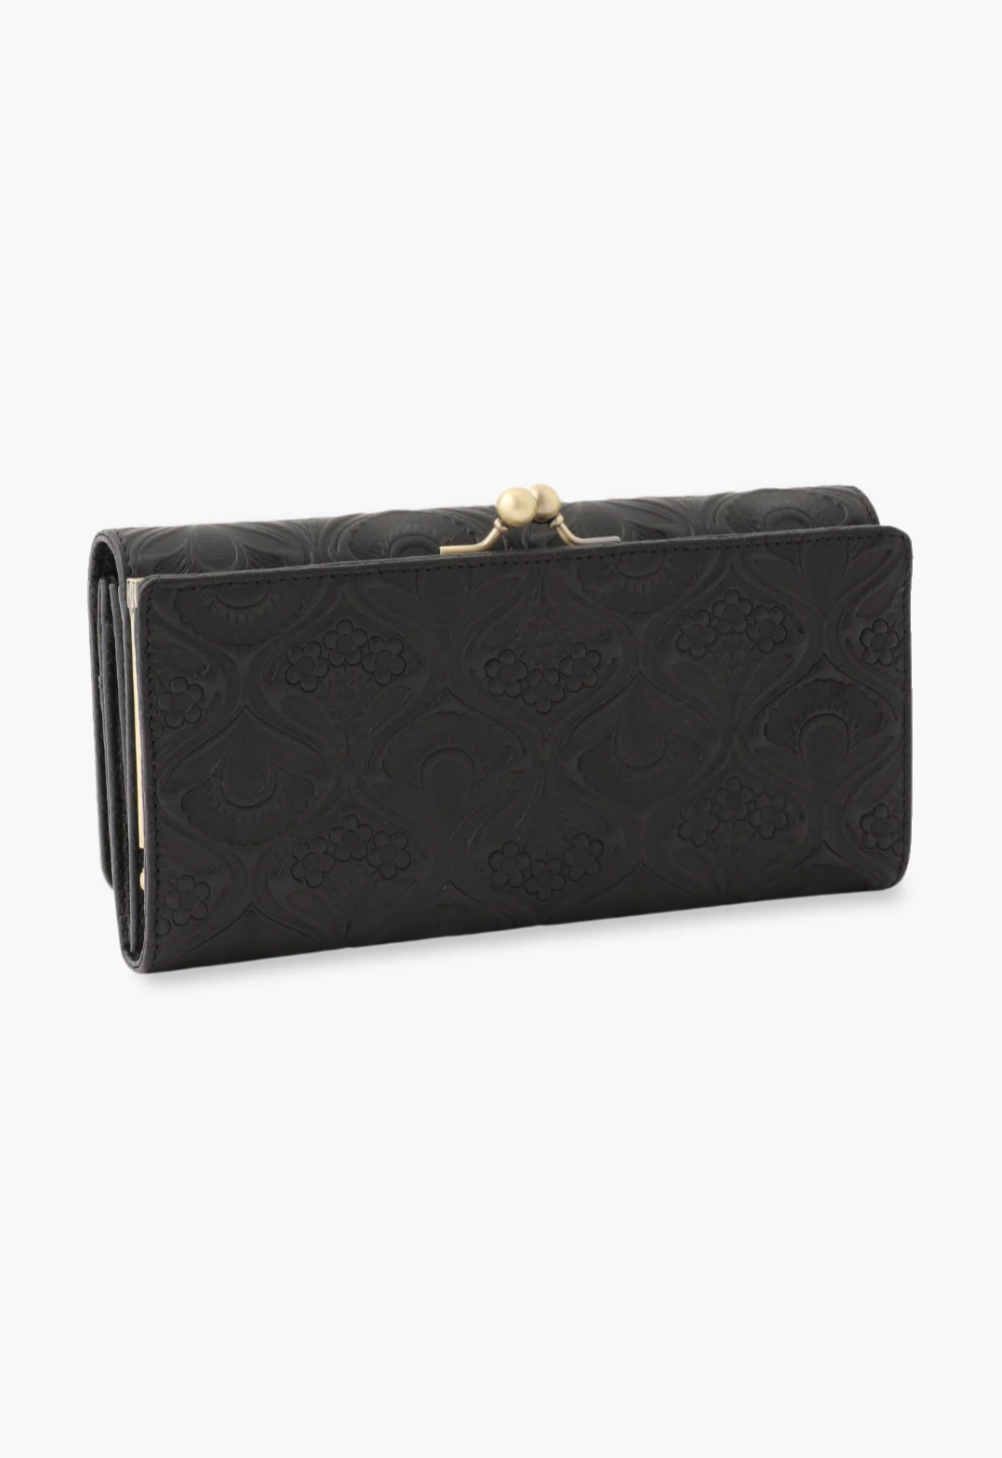 Nova Wallet black leather wallet with Victorian embossed patterns, golden kiss lock closure